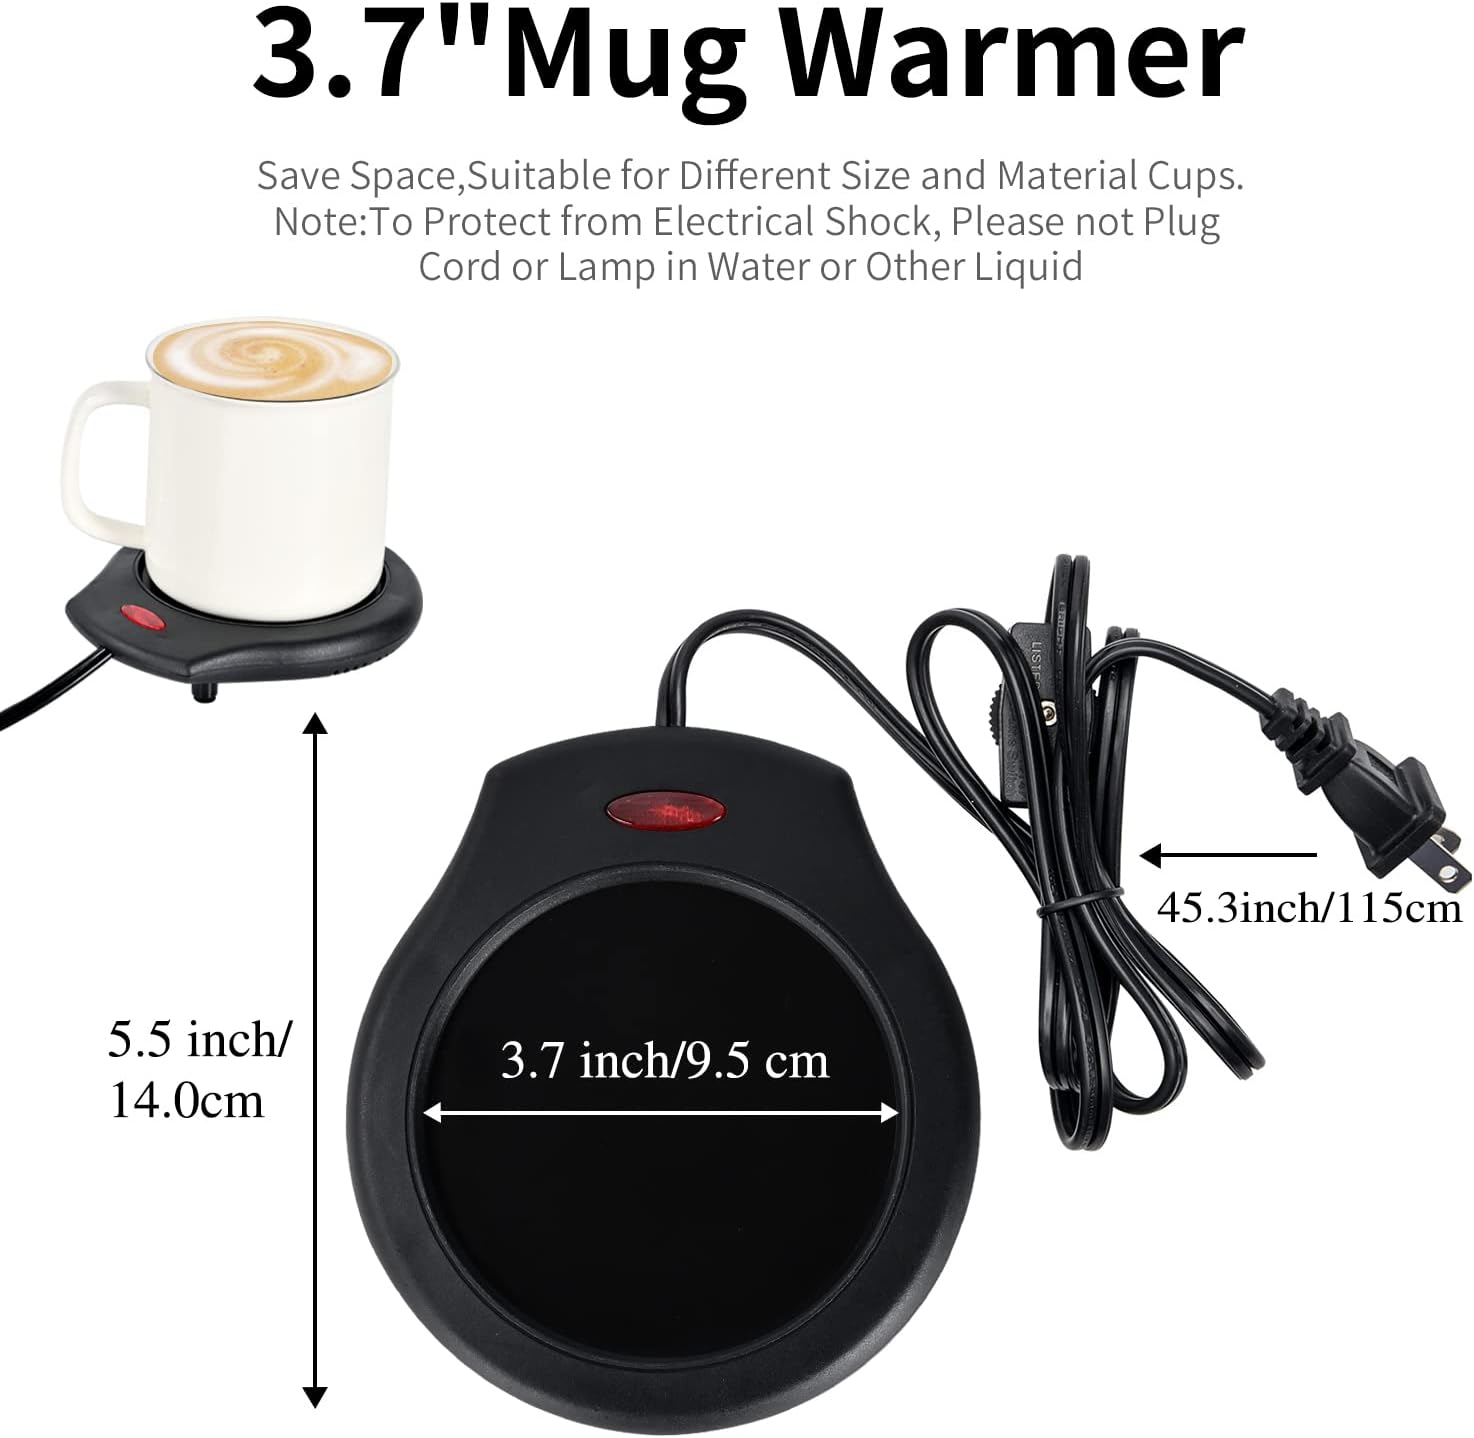 ASAWASA Candle Warmer for Large Jar, Coffee Mug Warmers, Safely Releases Scents Without a Flame, Melt The Candle Quickly, Enjoy Your Warm Coffee Tea. Gifts for Festival Birthday Women Men Mom Dad